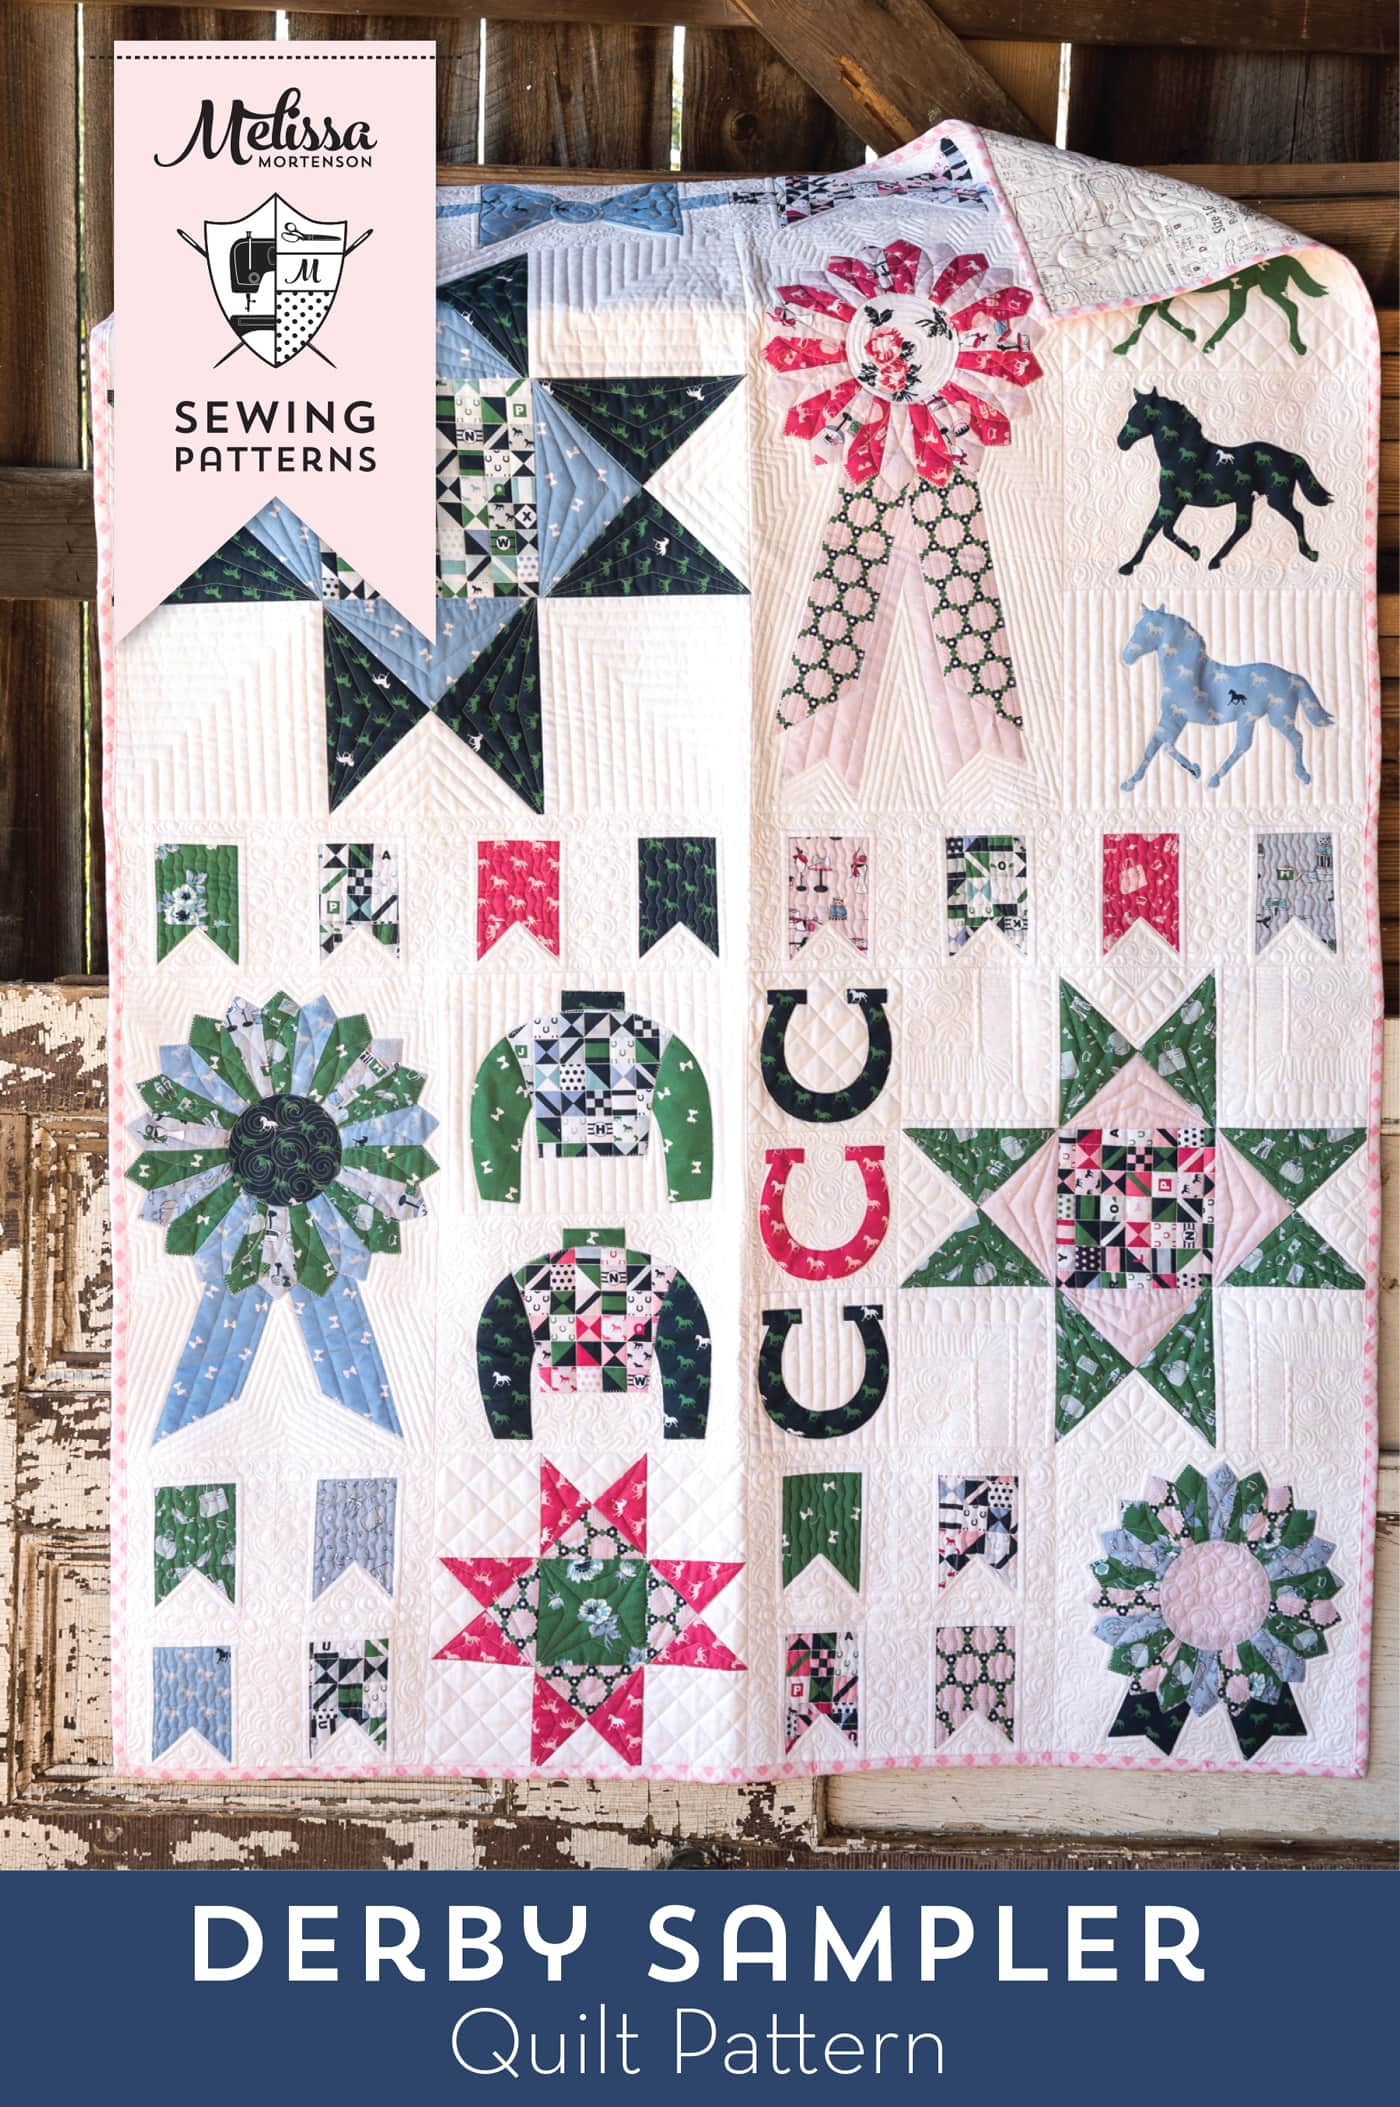 The Derby Sampler Quilt by Melissa Mortenson of polkadotchair.com - a quilt block sampler quilt perfect for Derby. A great quilt for equestrian and horse lovers! 